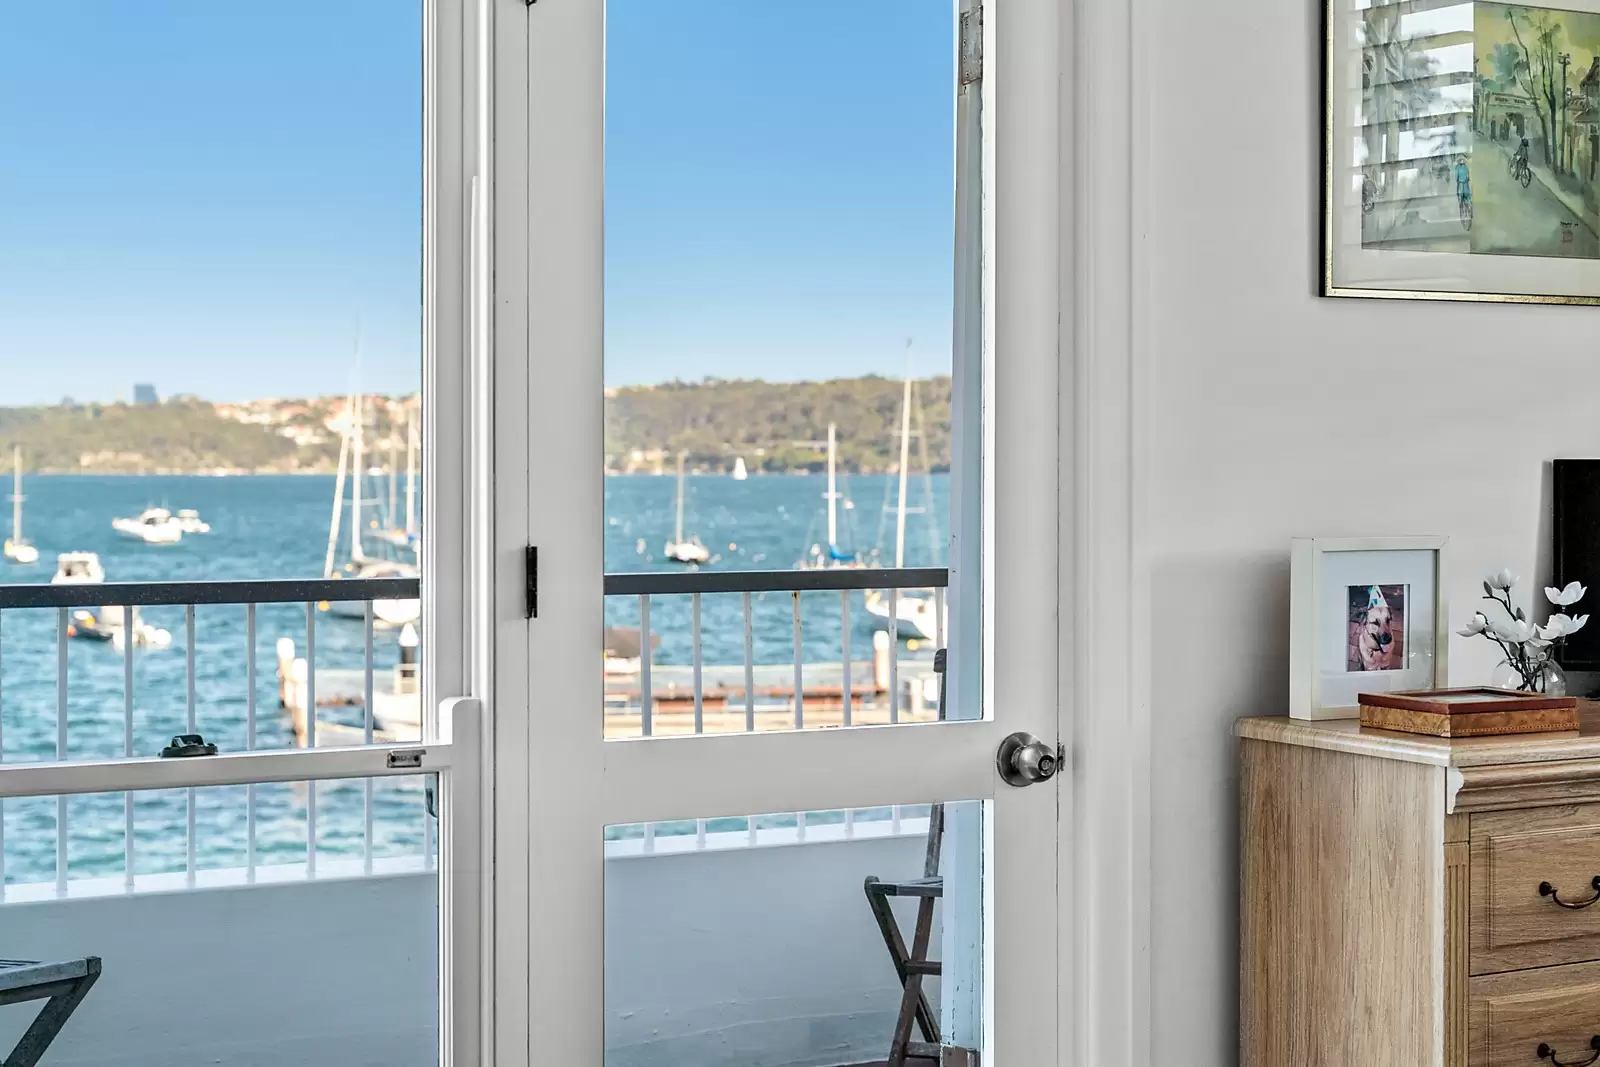 Photo #16: 5 Marine Parade, Watsons Bay - Sold by Sydney Sotheby's International Realty